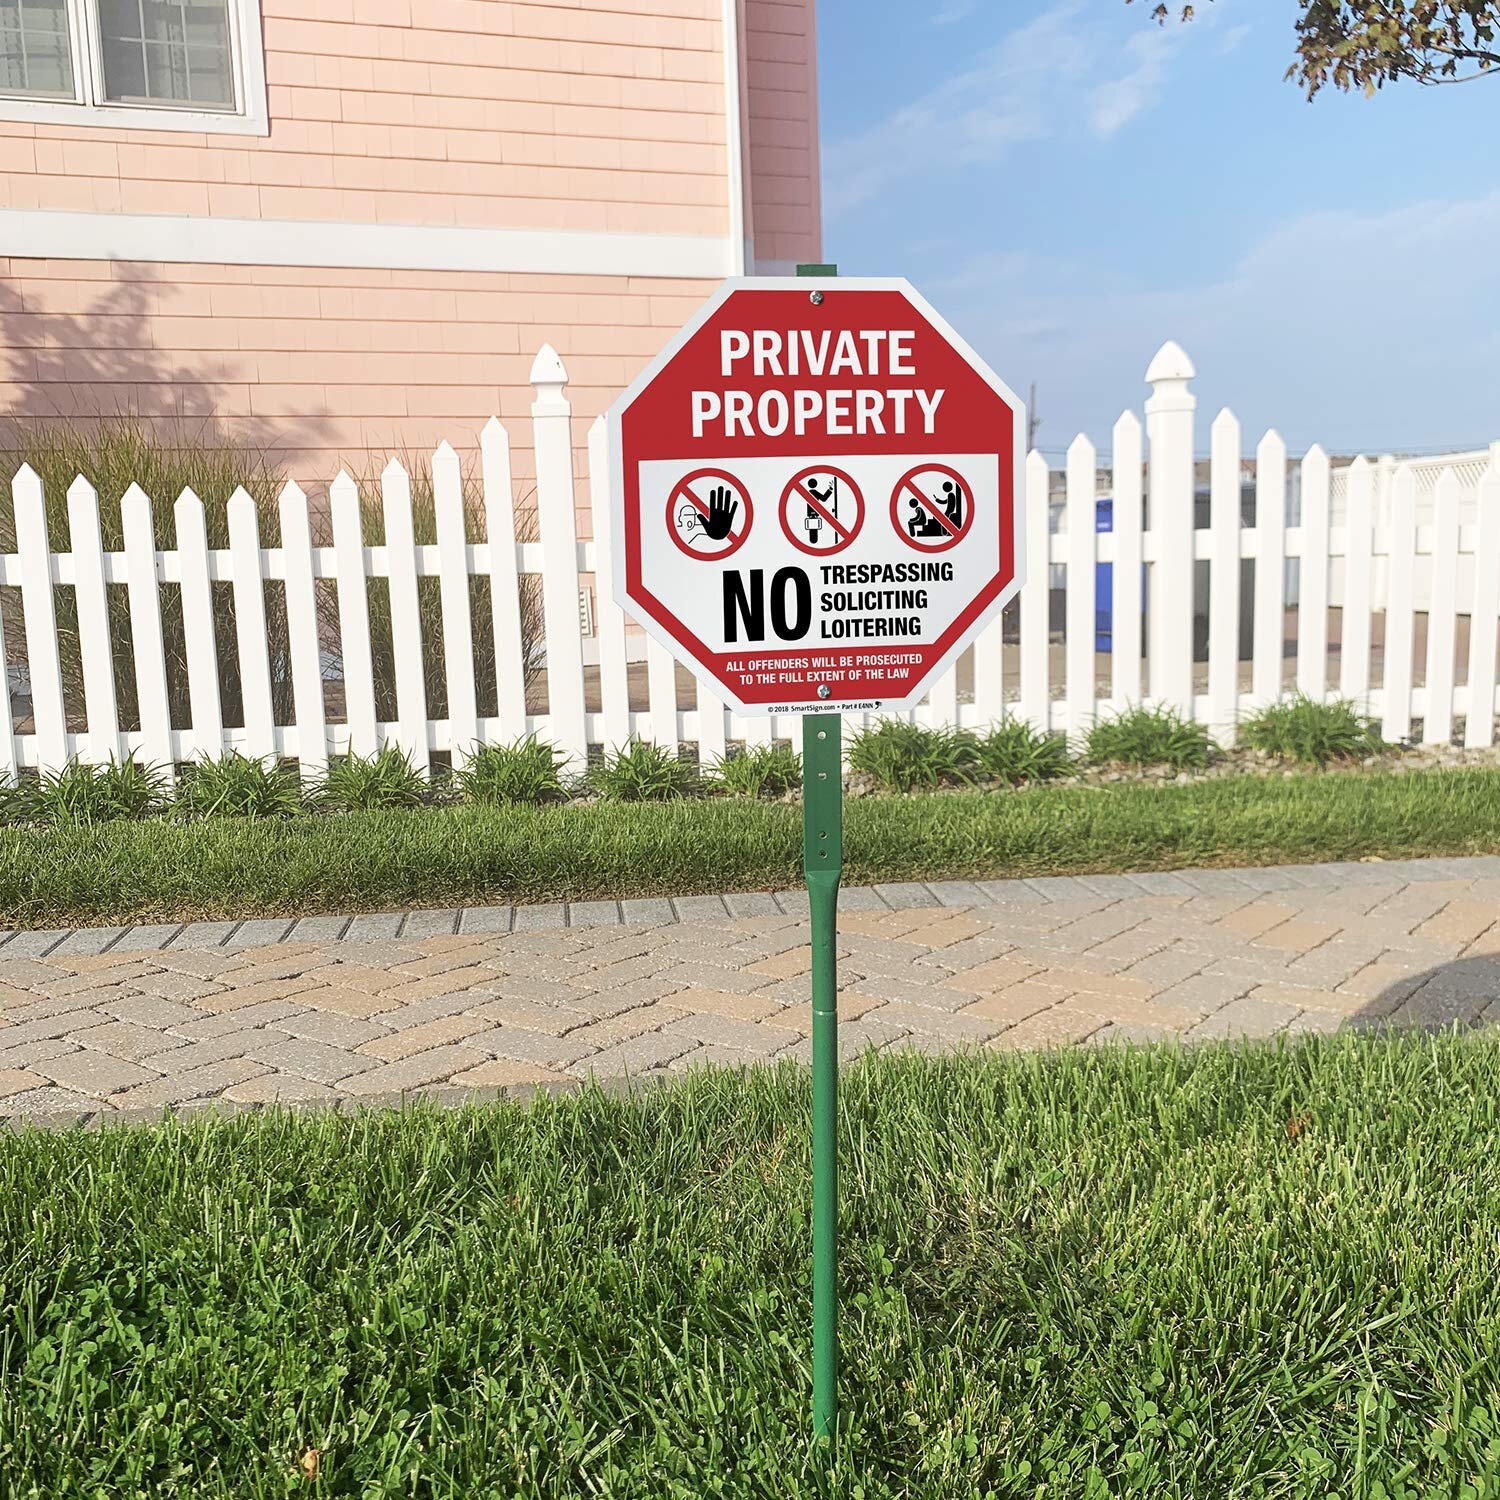 SmartSign "Warning No Soliciting" LawnBos... No Trespassing Private Property 